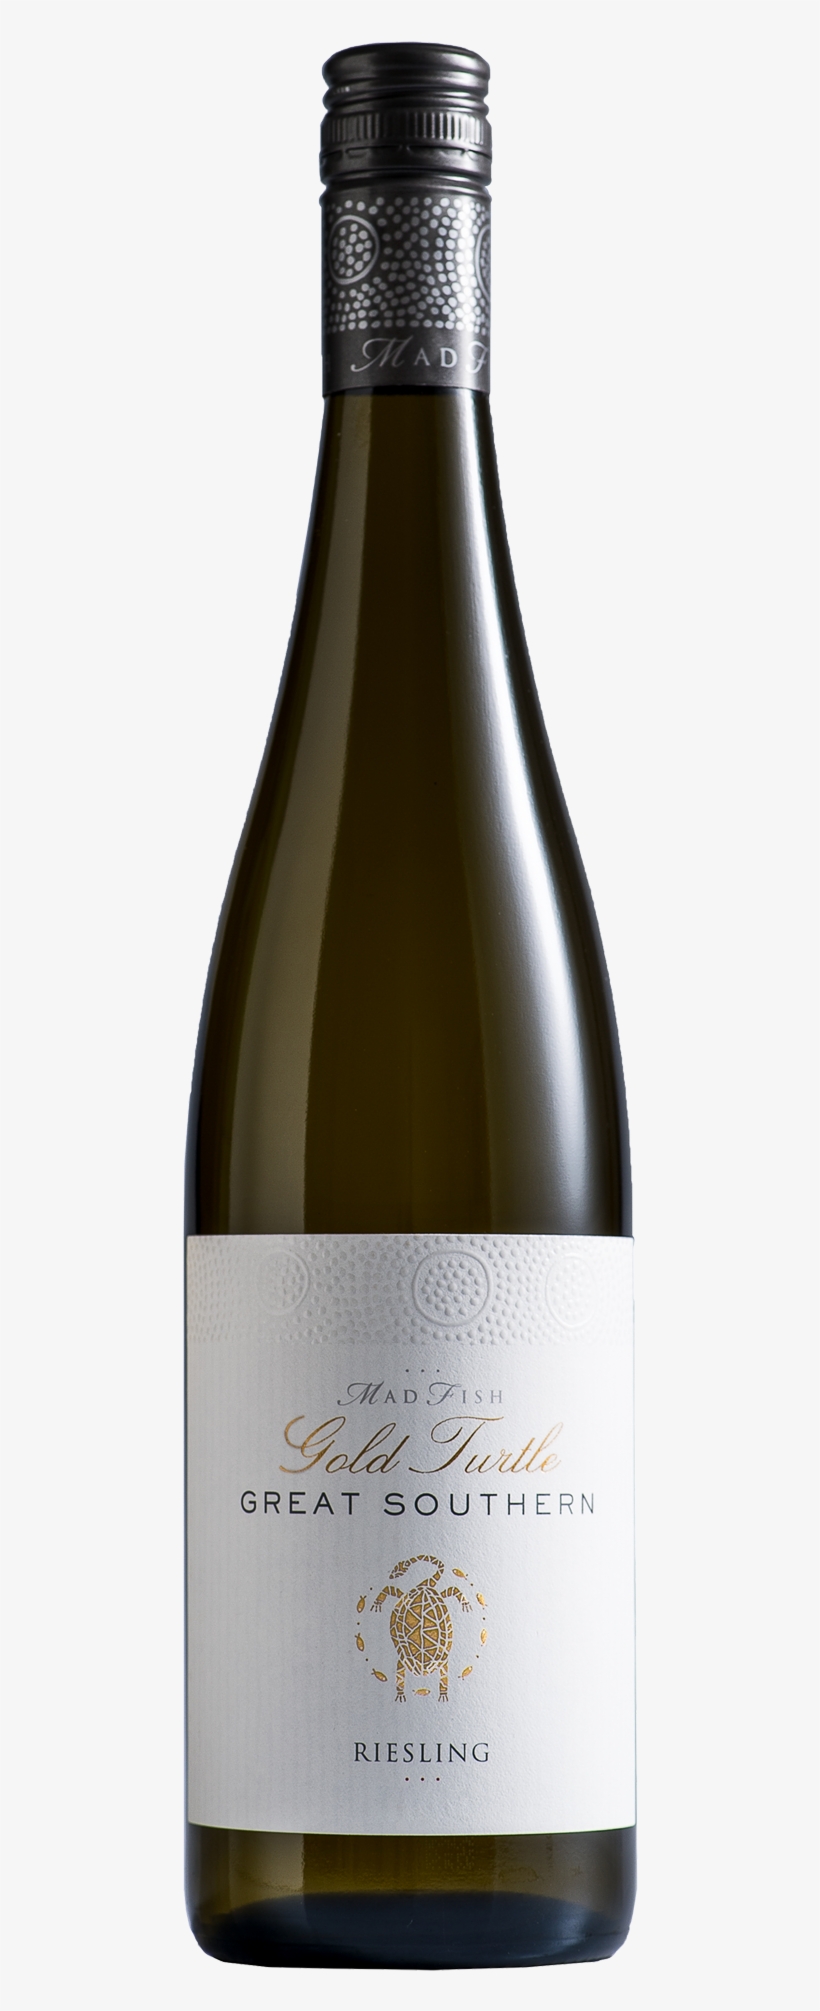 Madfish Gold Turtle Riesling 750ml - Bouchaine Pinot Noir 2015, transparent png #3011621